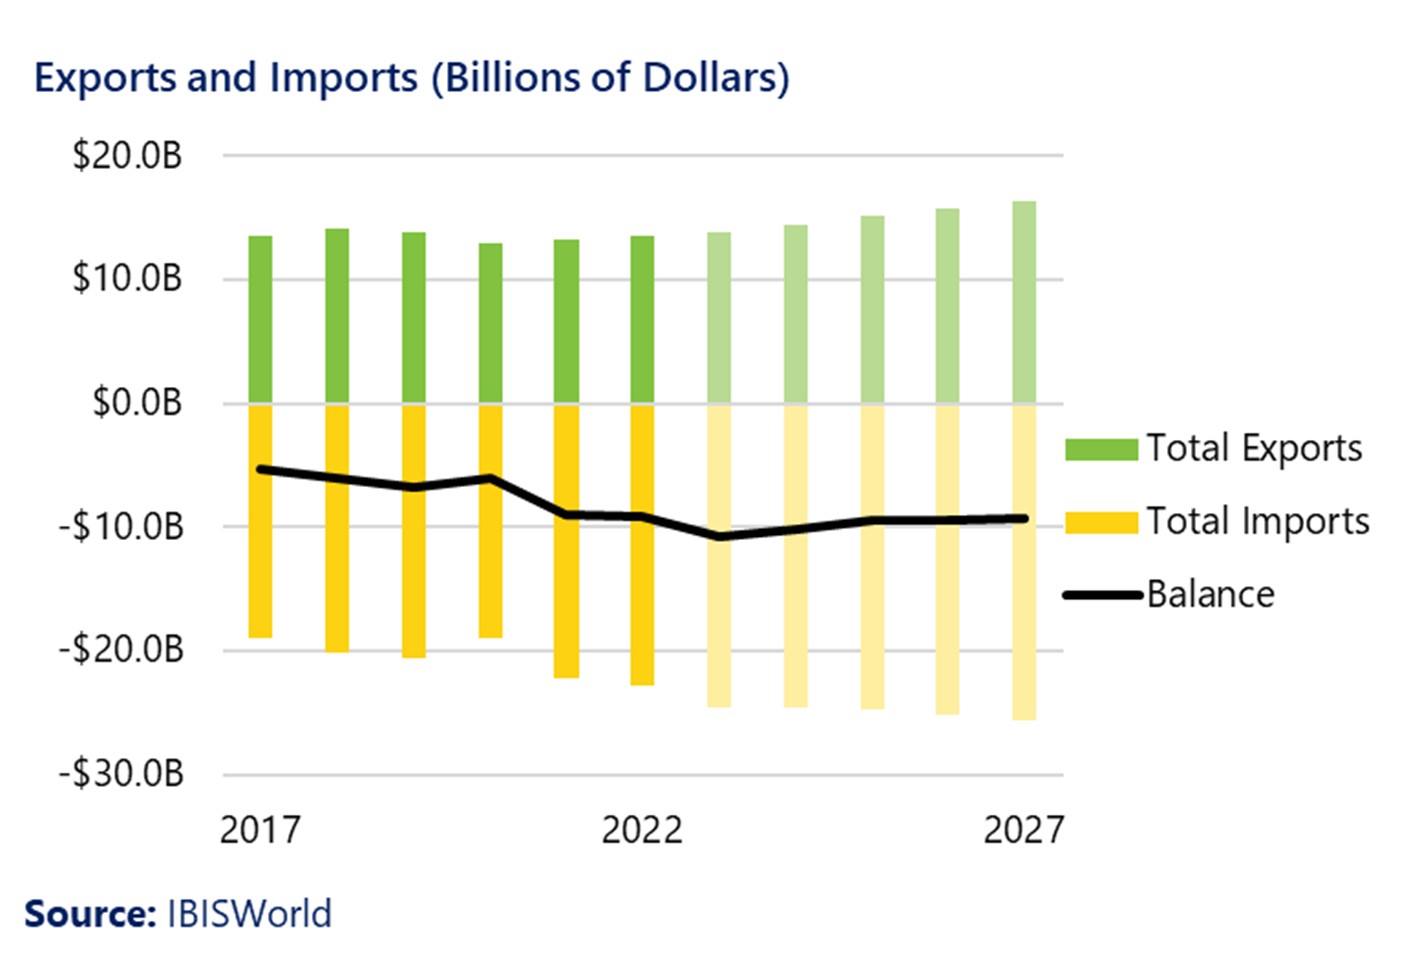 Bar chart showing medical devices exports and imports from 2017 to 2027